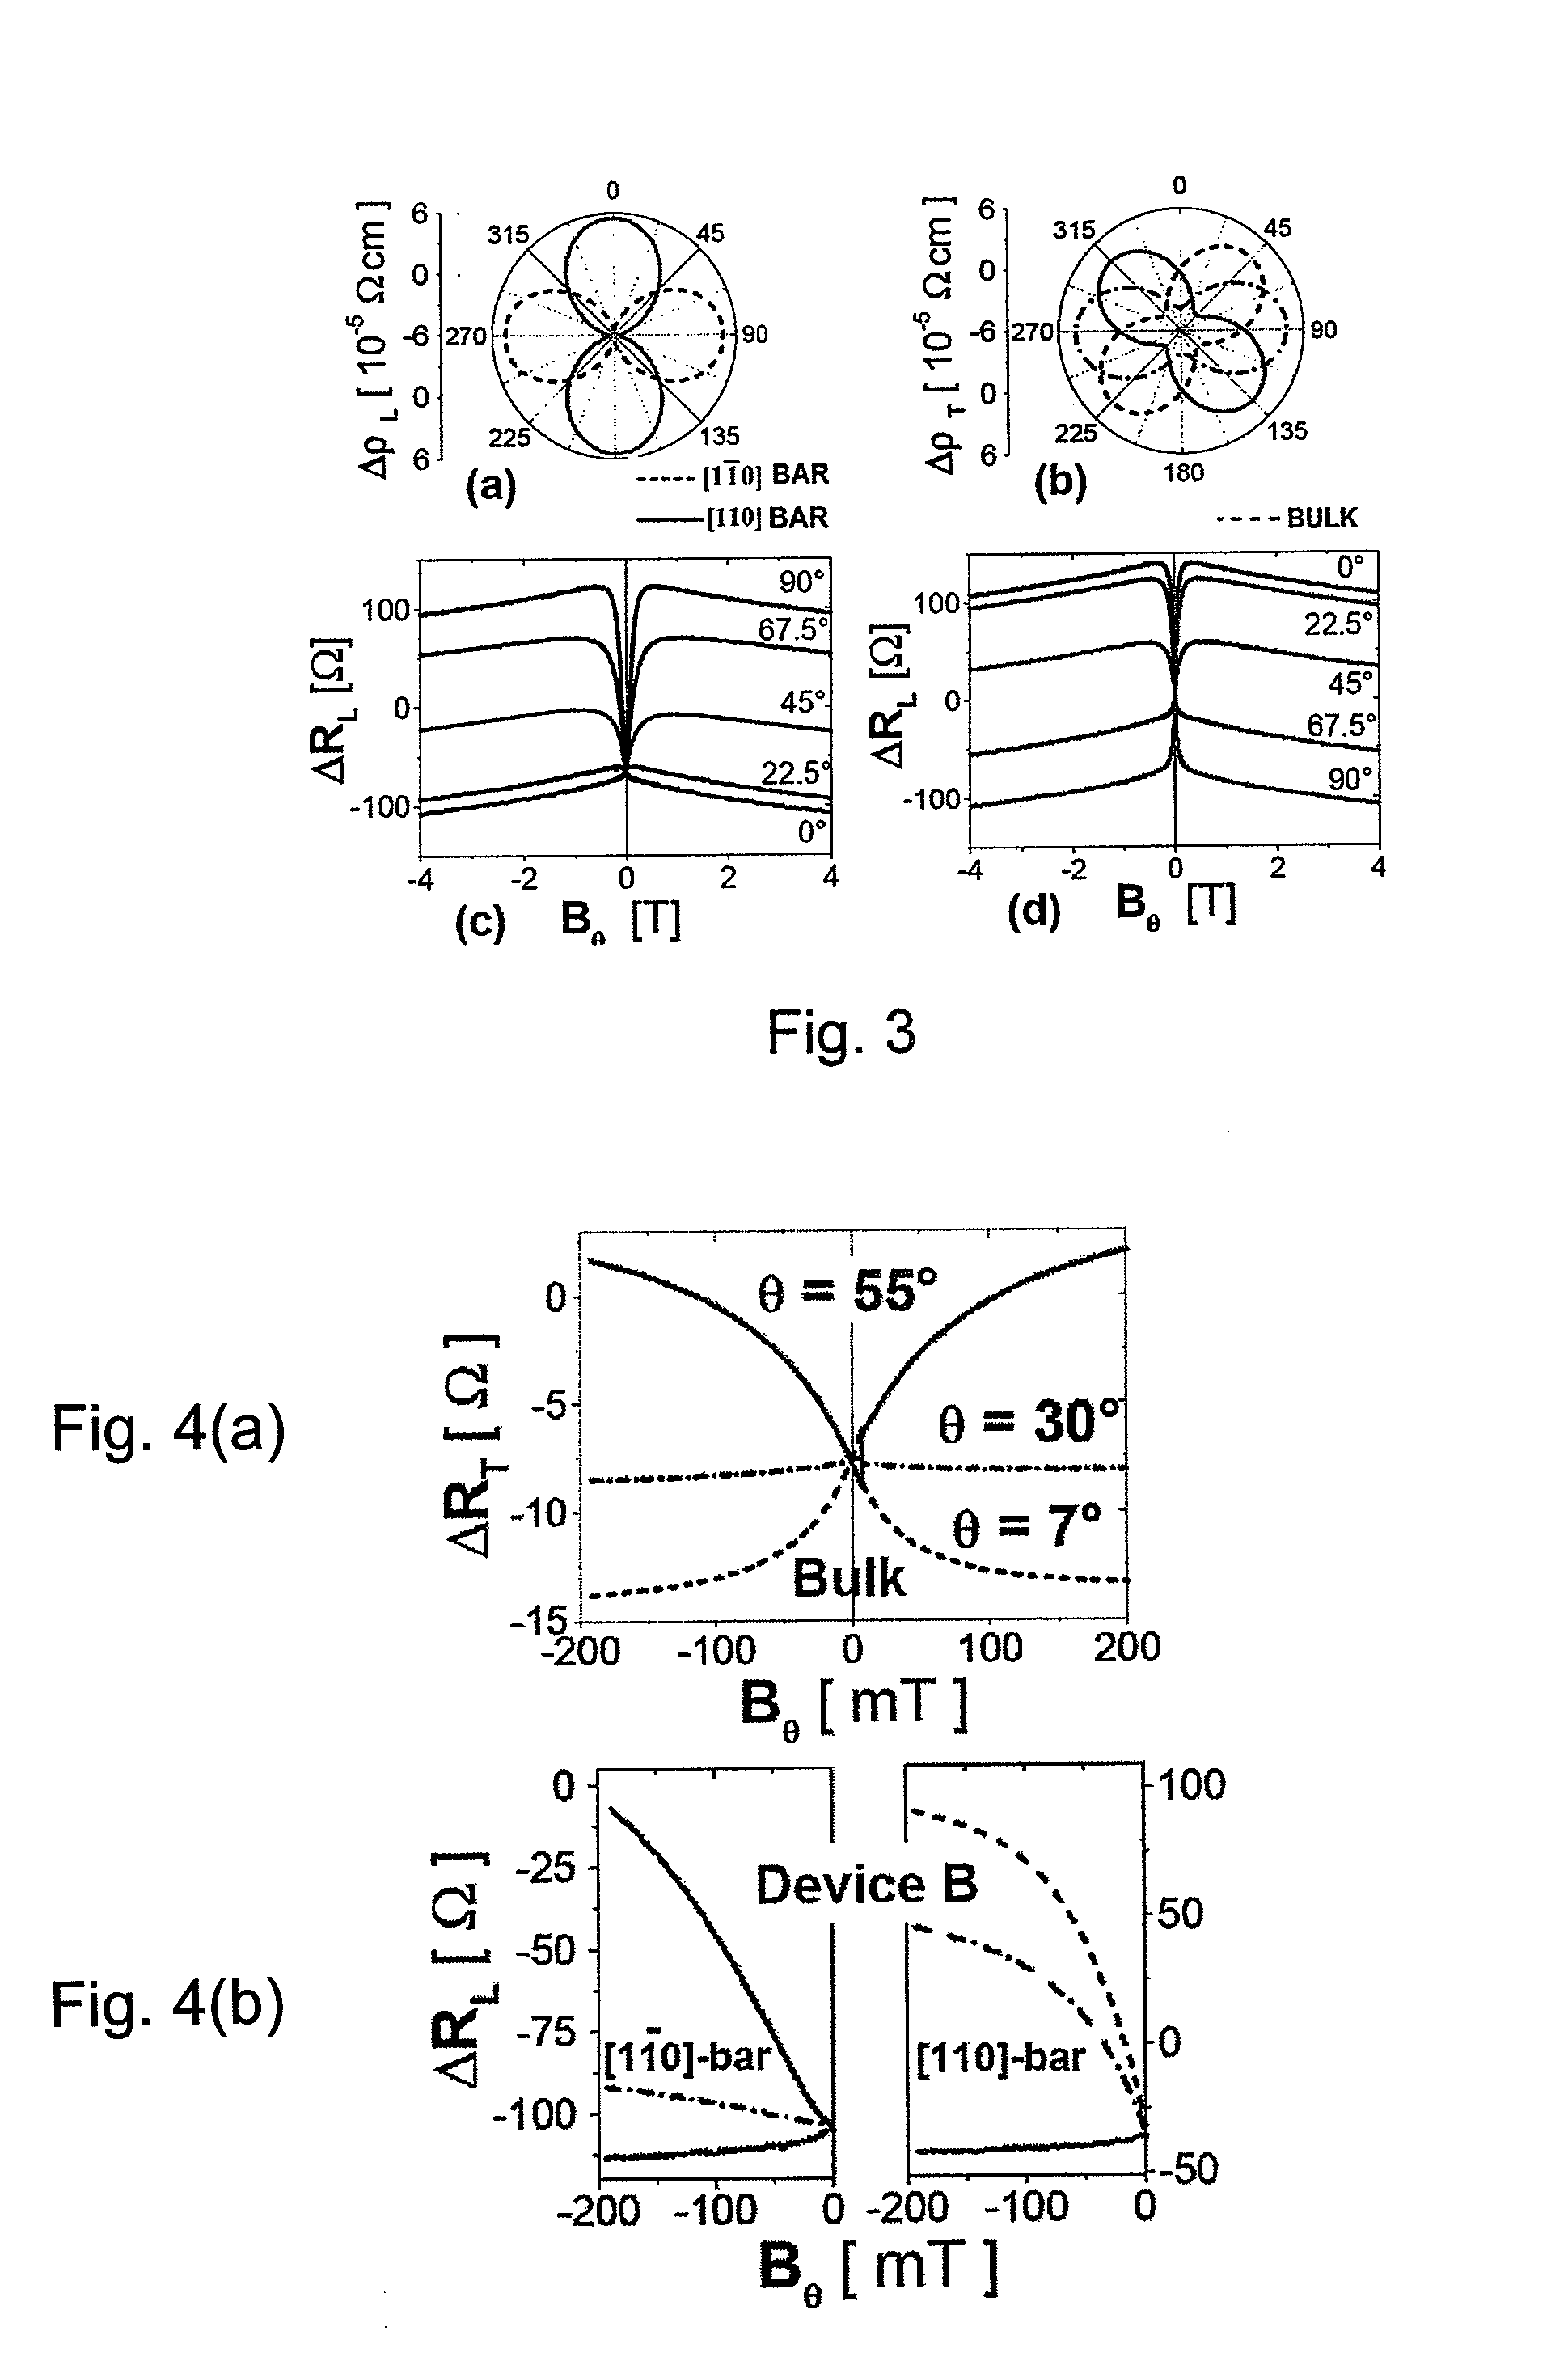 Method of controlling a magnetoresistive device using an electric field pulse